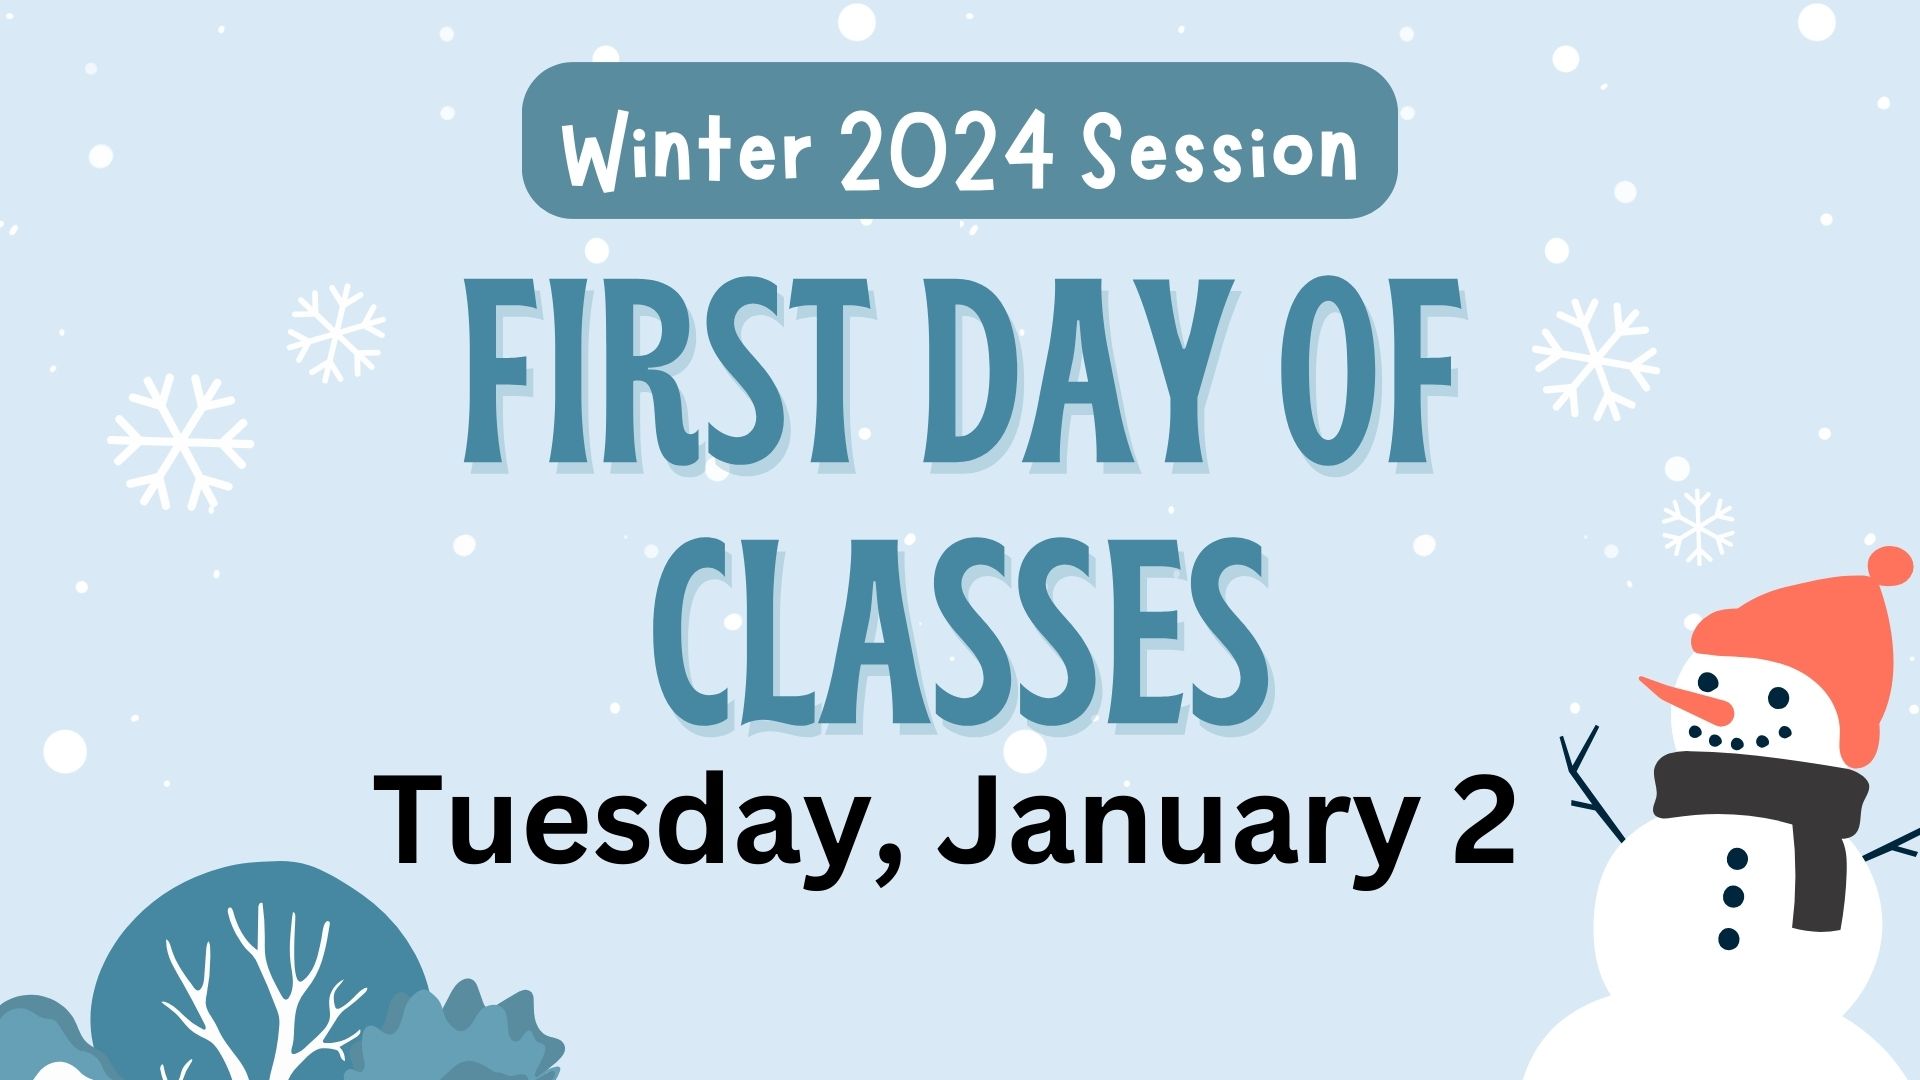 First day of classes for Winter 2024 session